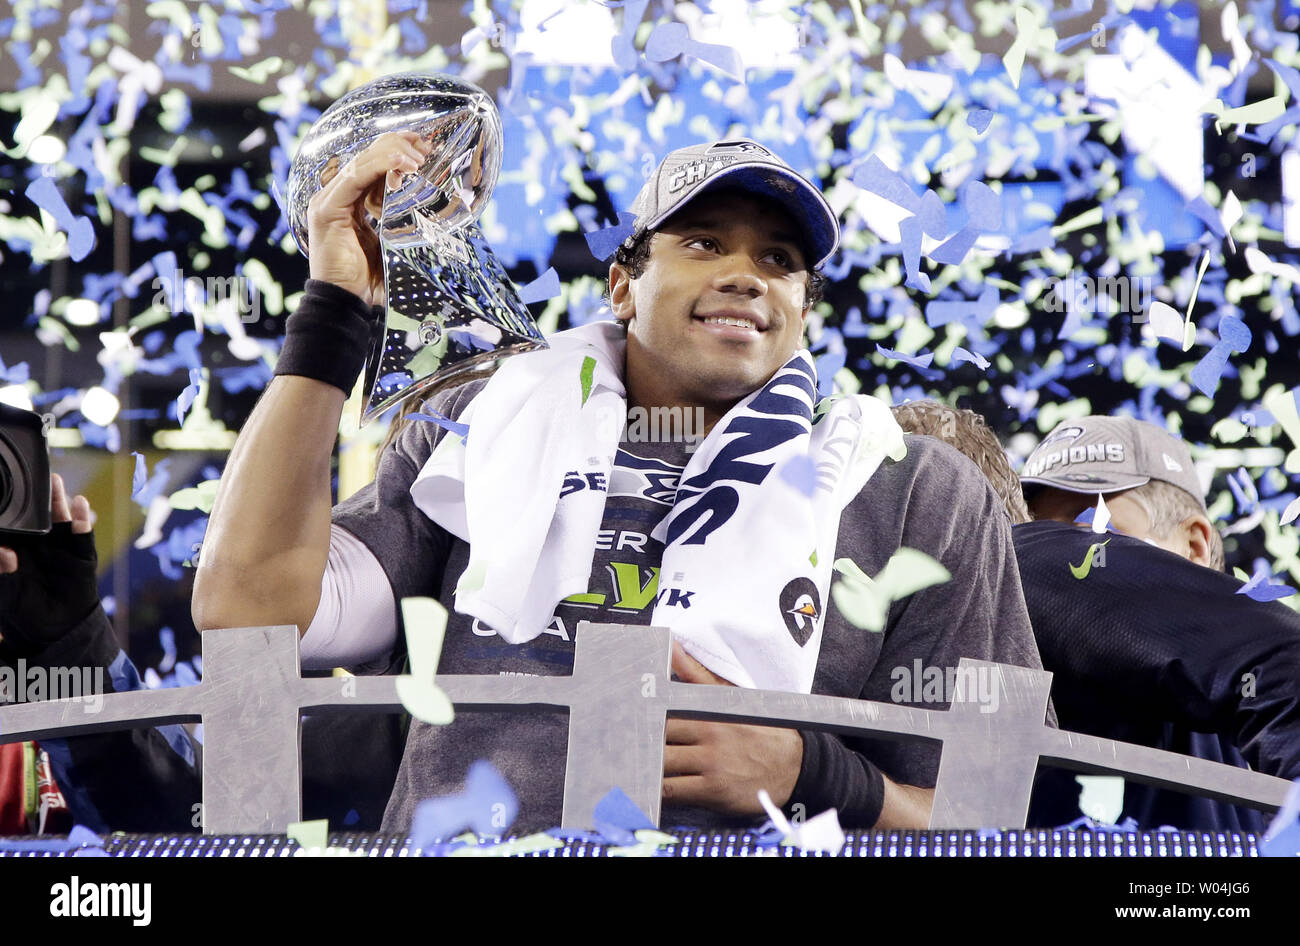 Seattle Seahawks quarterback Russell Wilson holds the Vince Lombardi trophy  after winning Super Bowl XLVIII at MetLife Stadium in East Rutherford, New  Jersey on February 2, 2014. Seattle beat Denver 43-8 to